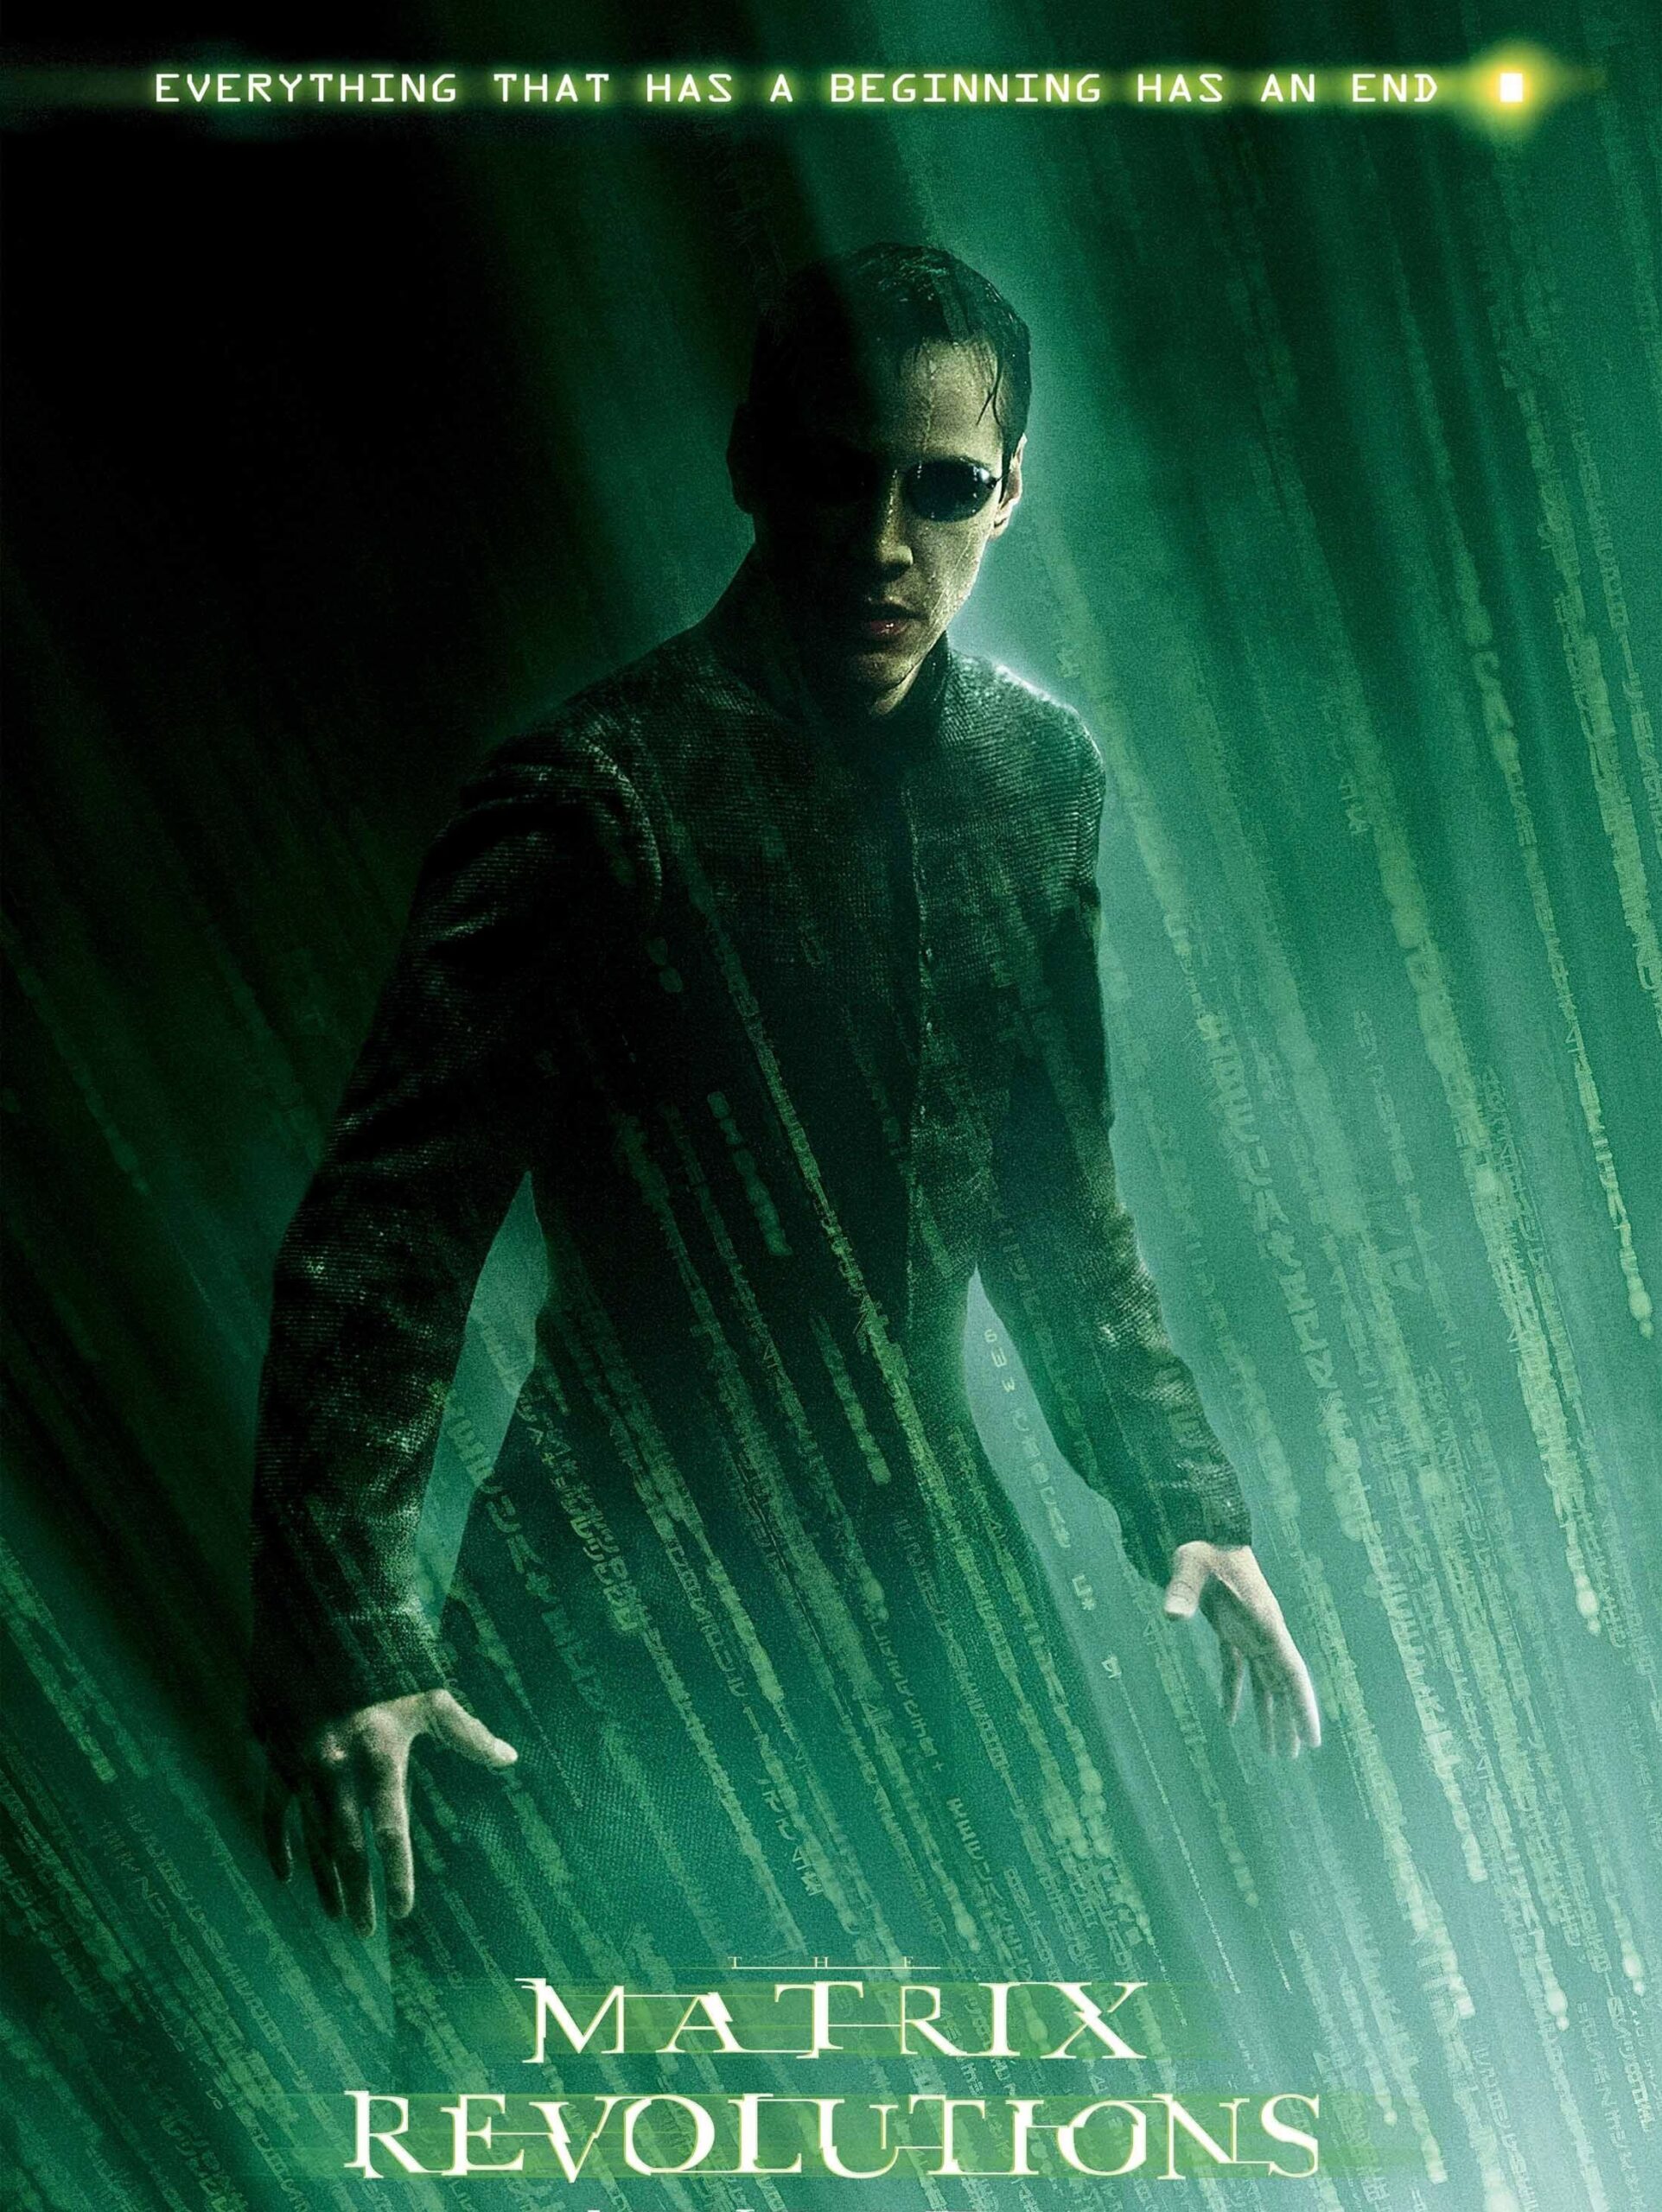 Everything that has a beginning has an end - The Matrix Revolutions (2003)